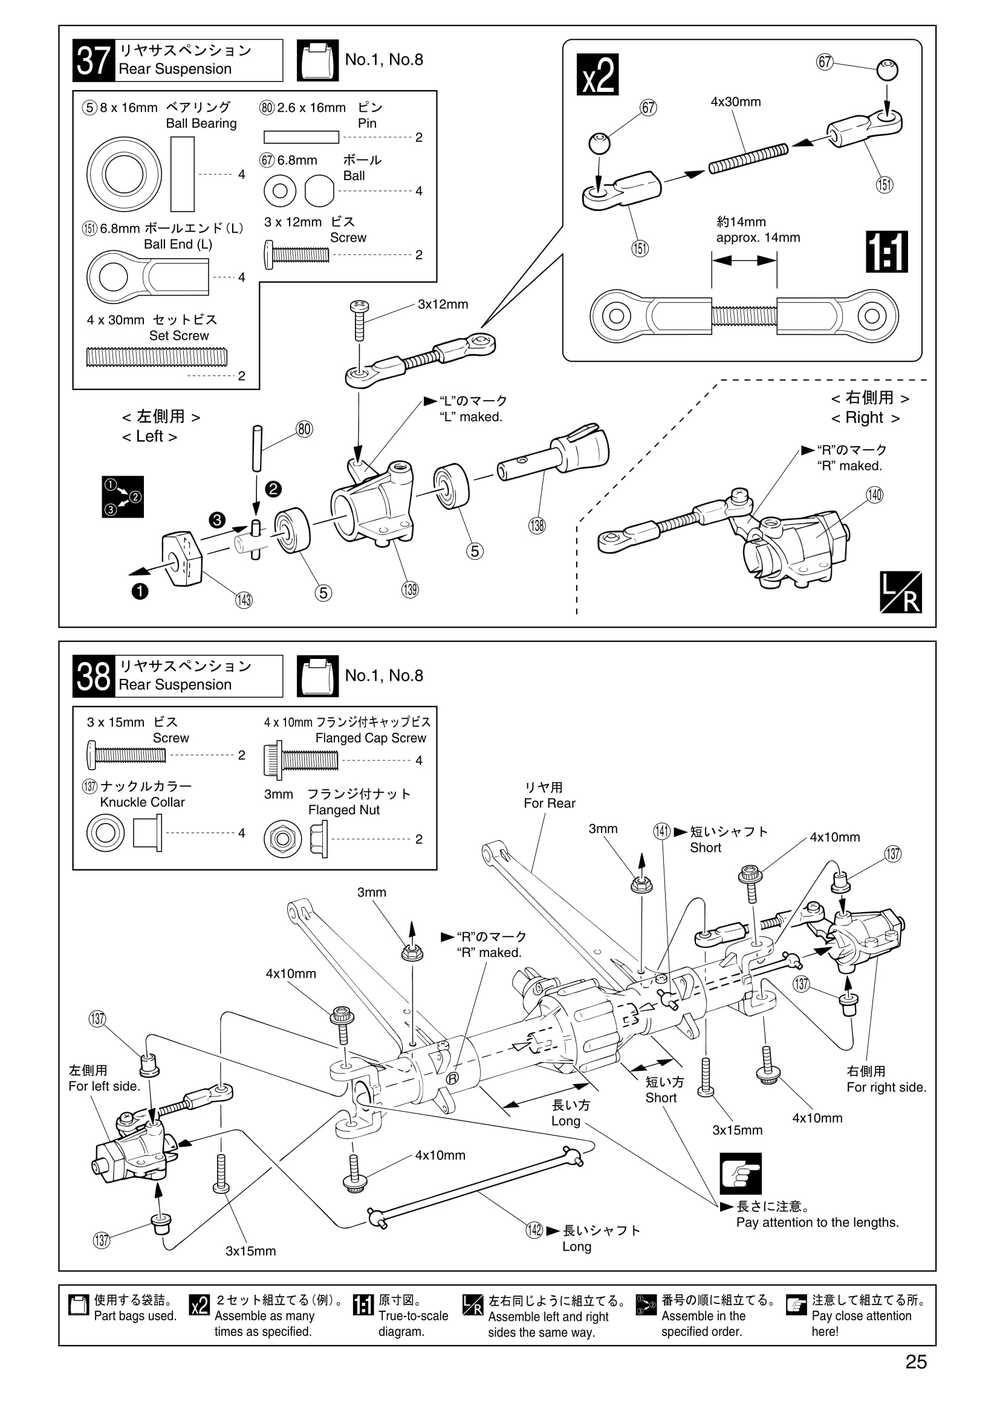 Kyosho - 31221 - Mad-Force - Manual - Page 25